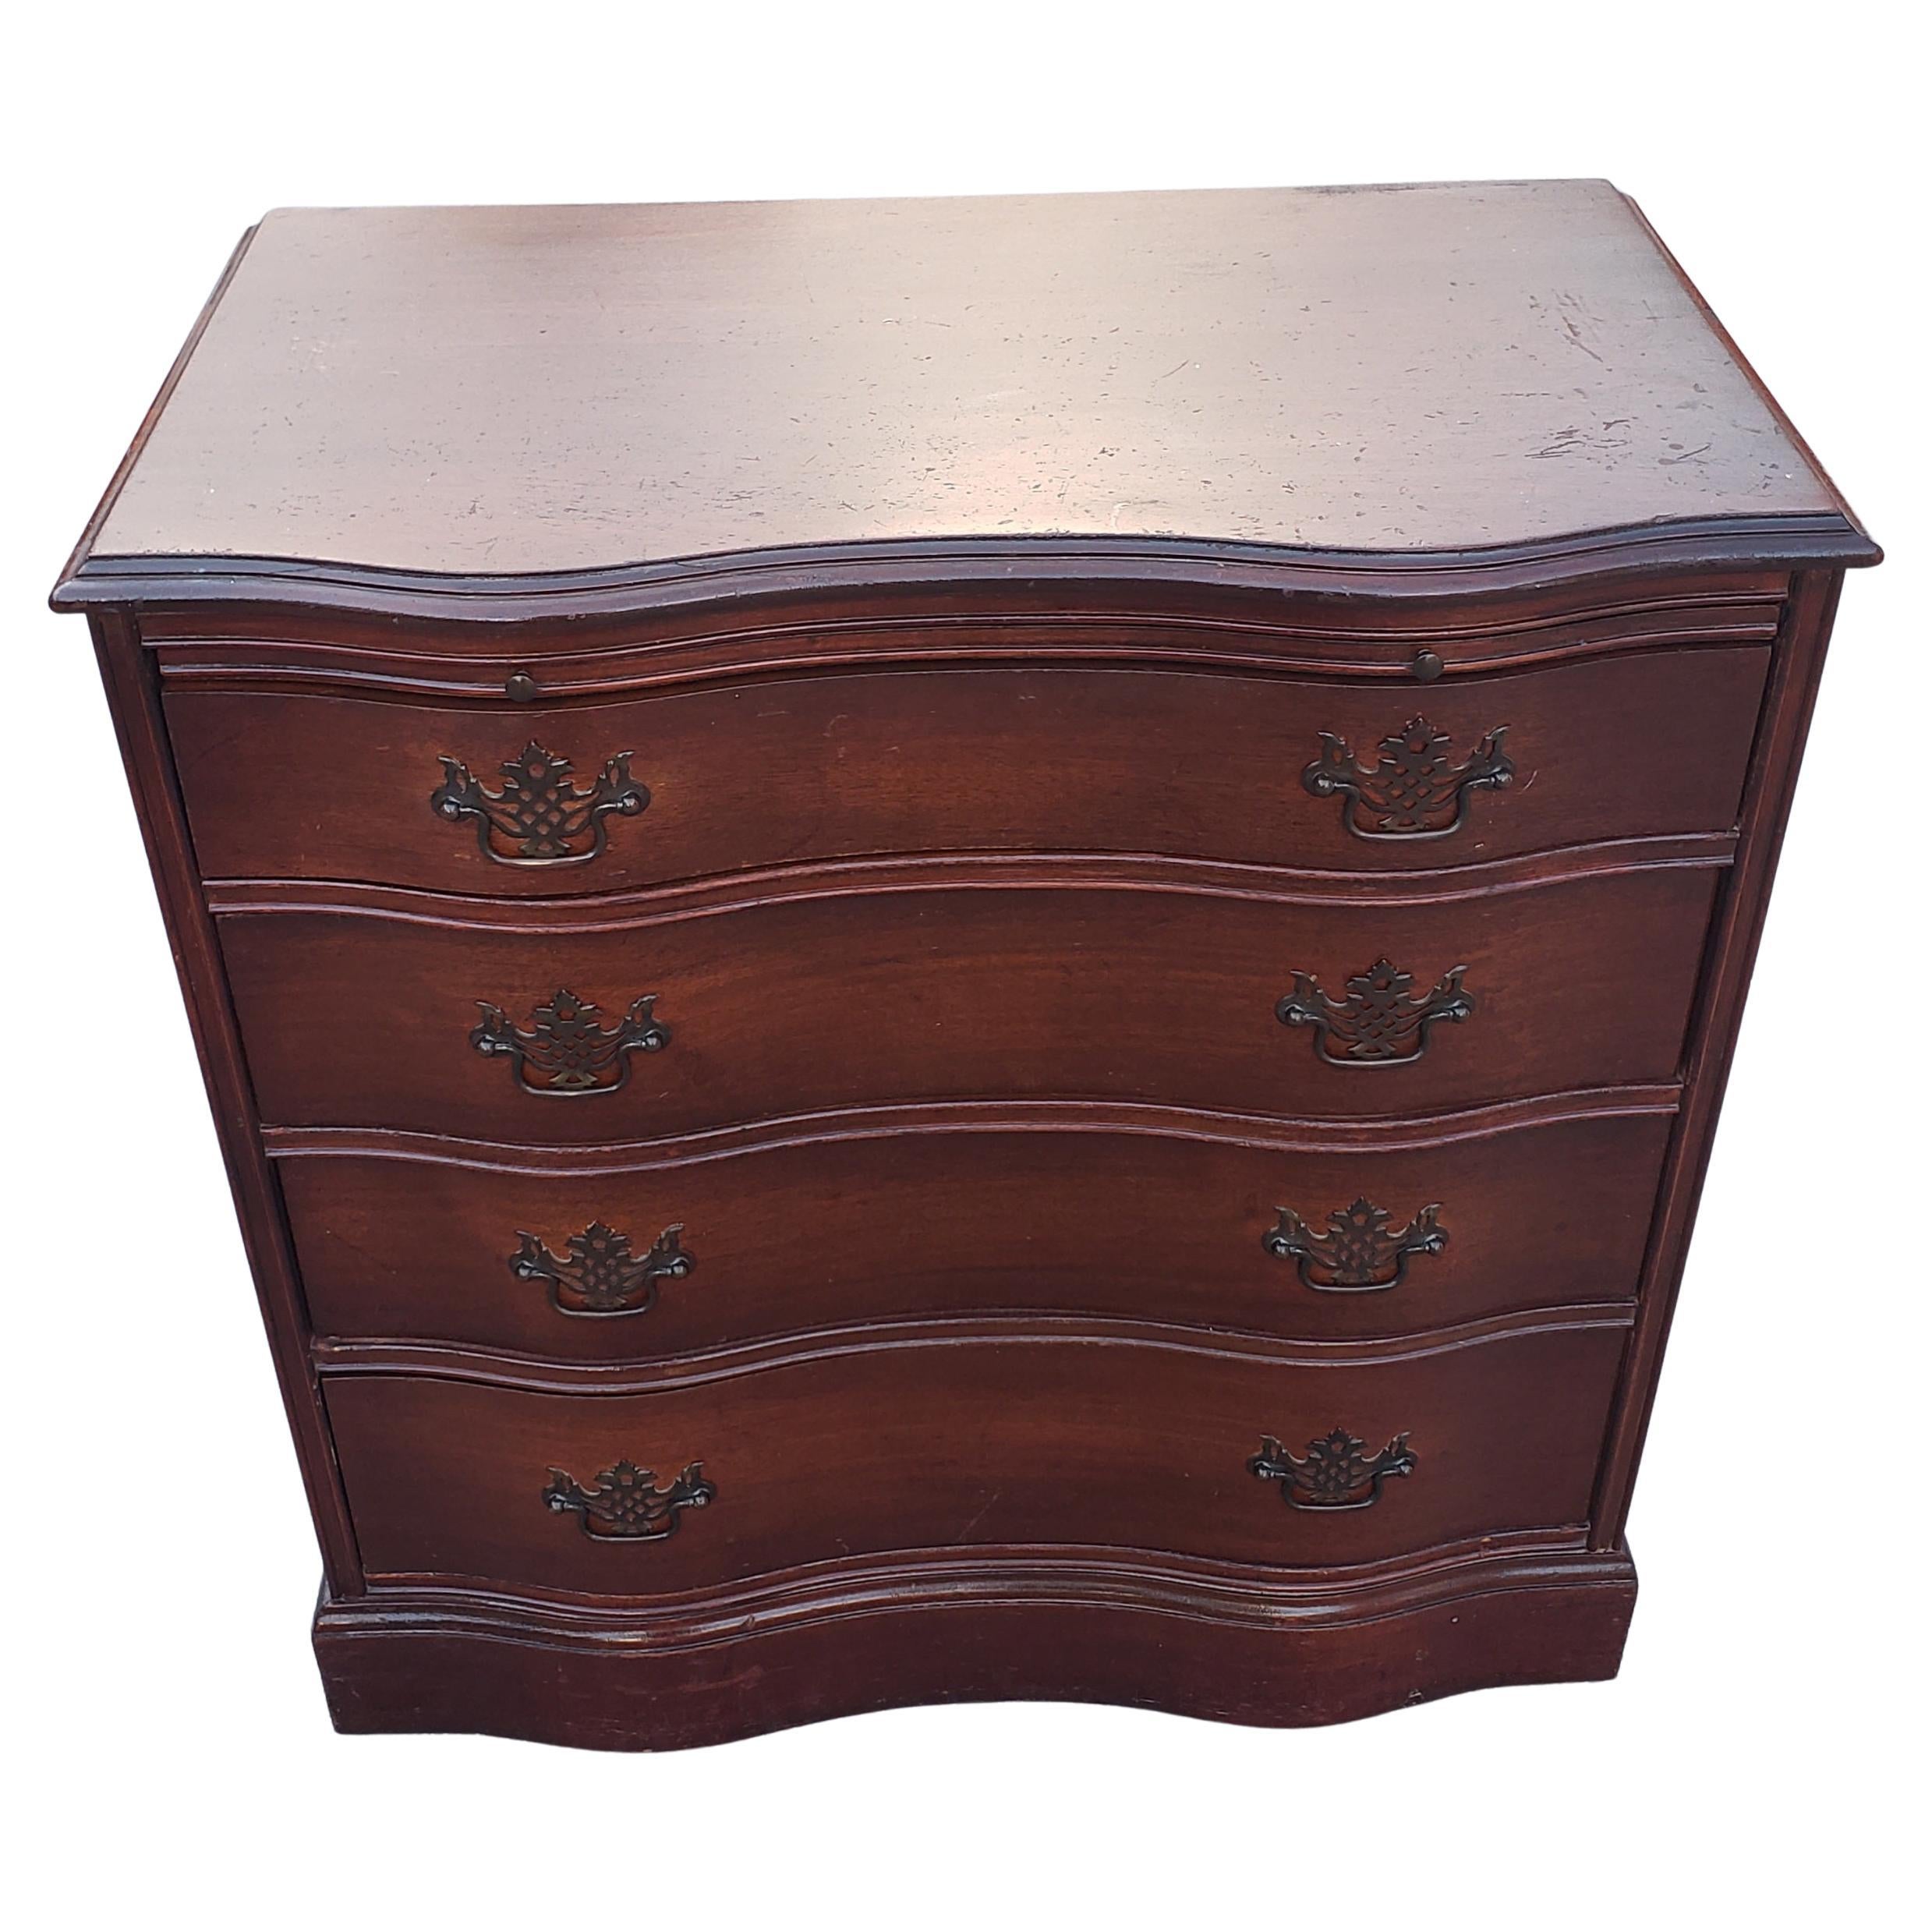 1930s Chippendale Serpentine front mahogany chest of drawers with pull out tray. Measures 30